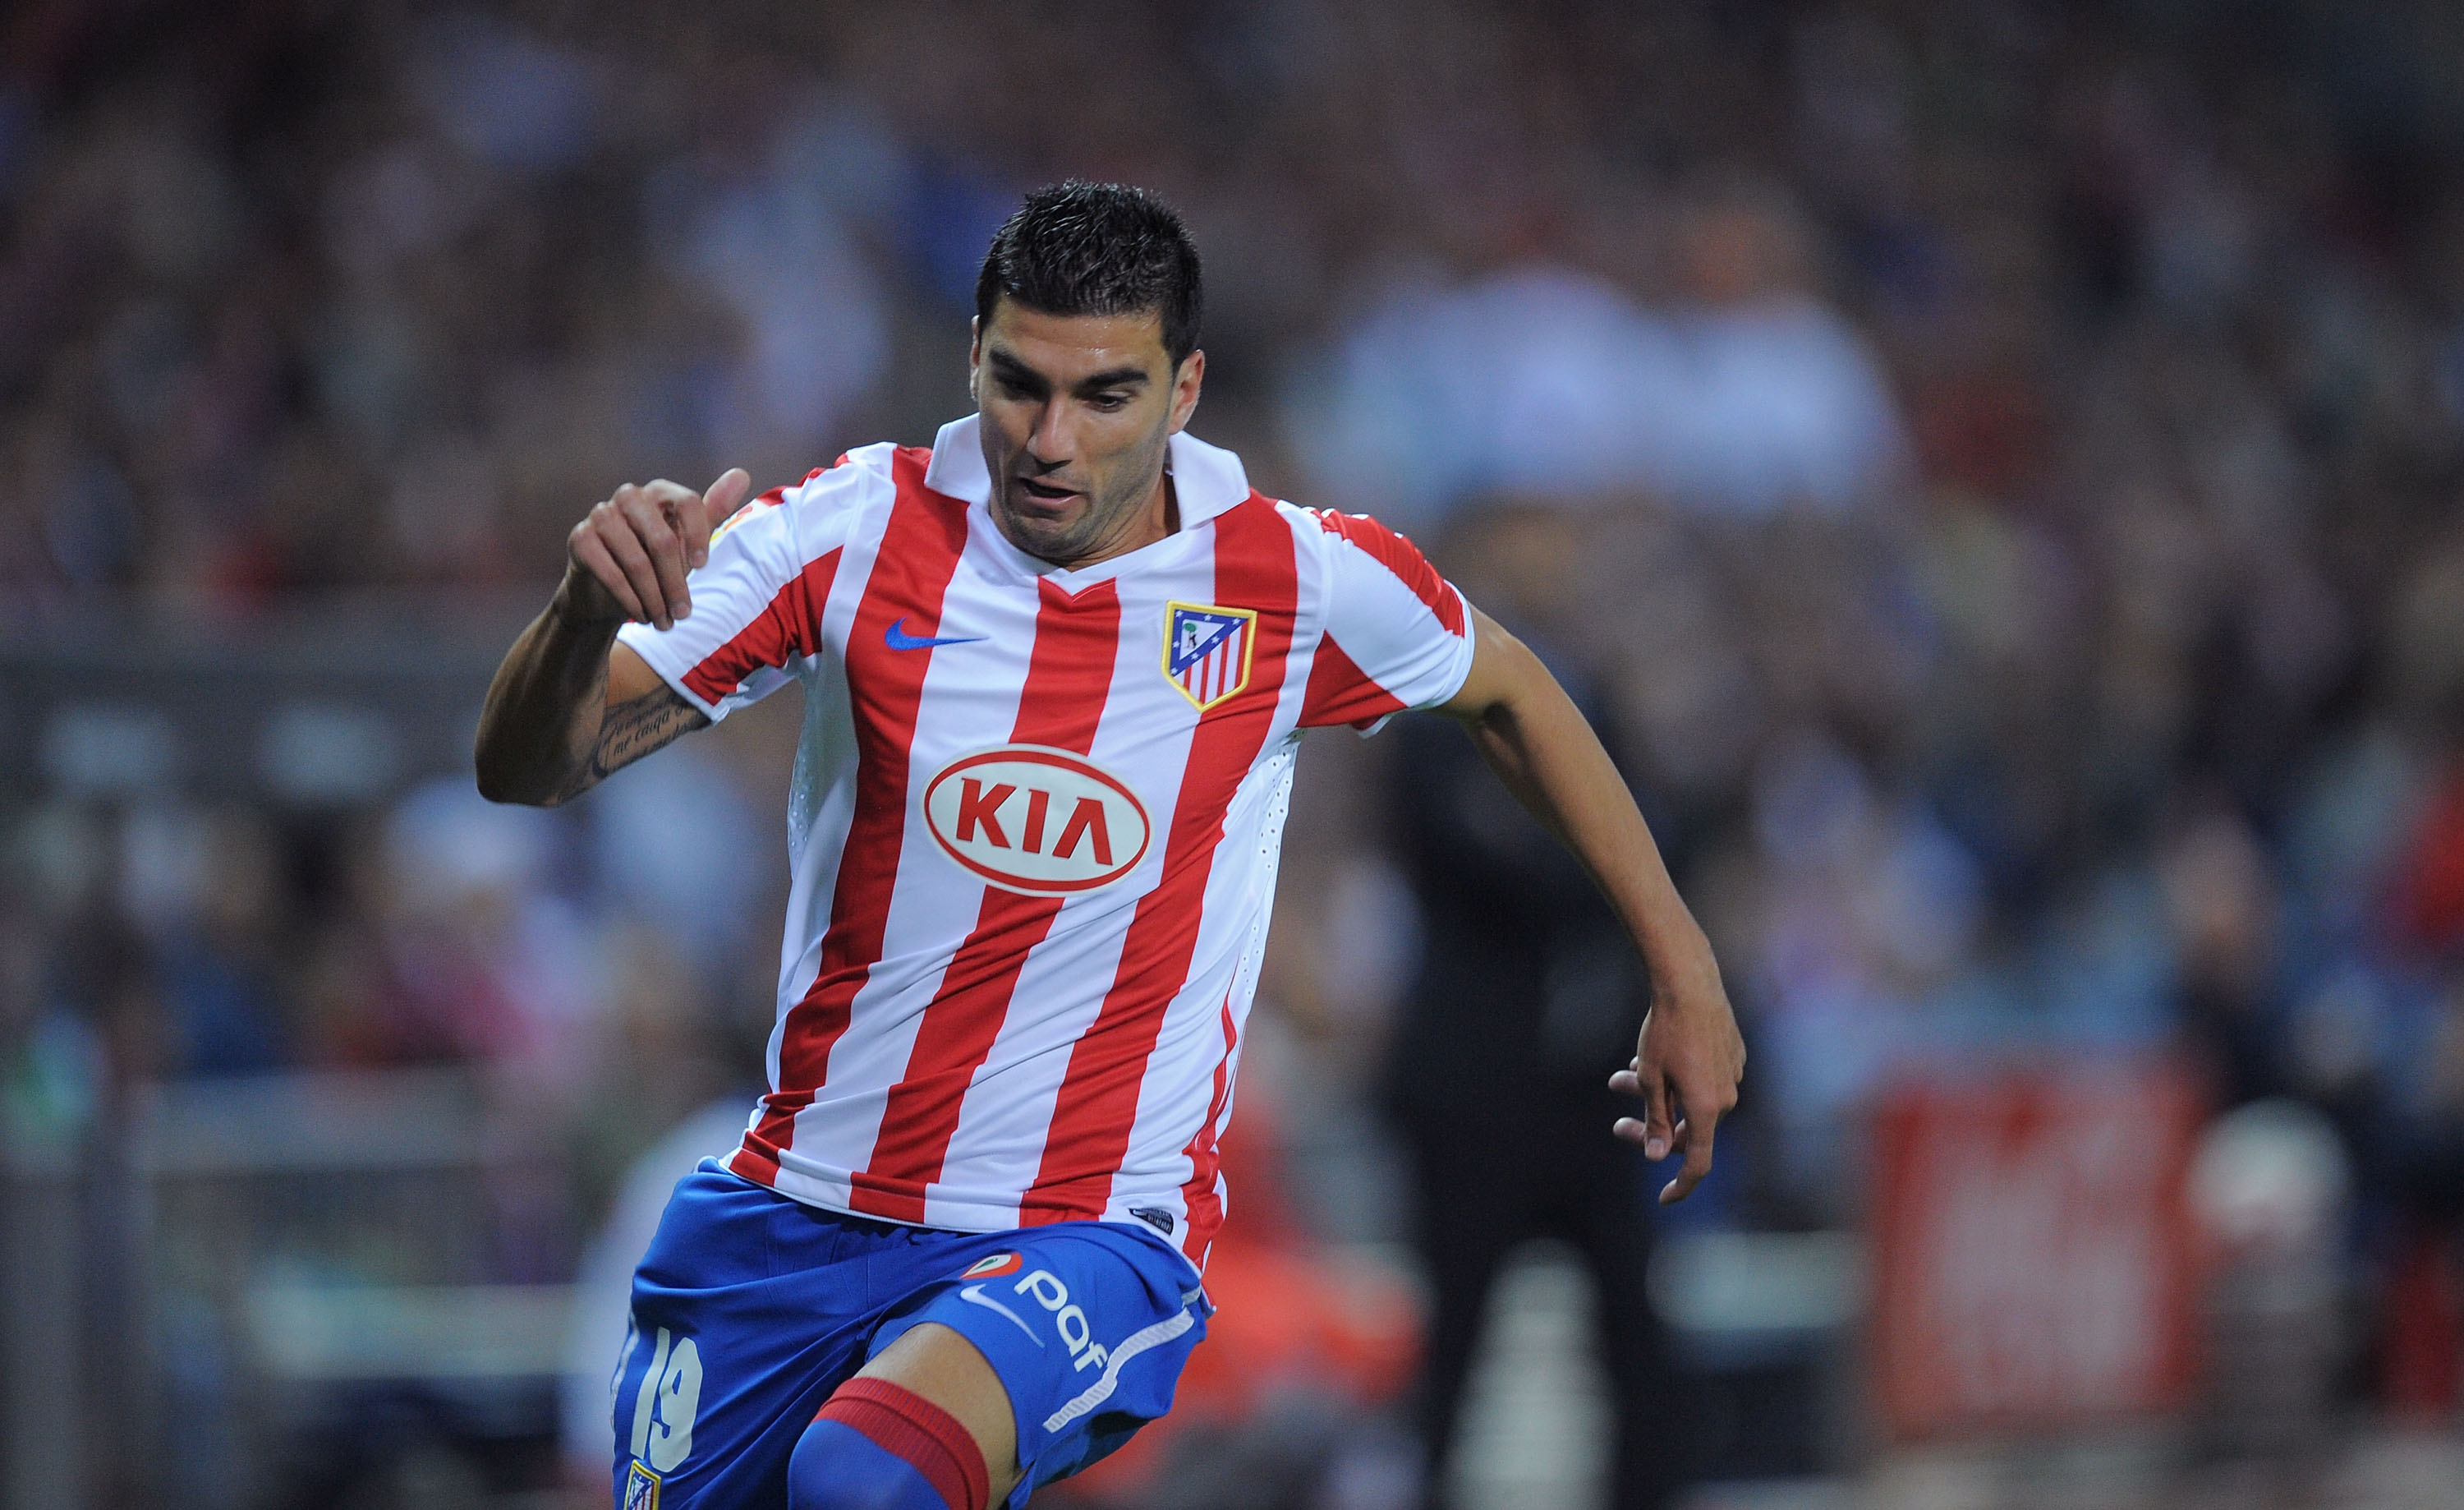 MADRID, SPAIN - SEPTEMBER 26:  Jose Antonio Reyes of Atletico Madrid in action during the La Liga match between Atletico Madrid and Real Zaragoza at the Vicente Calderon stadium on September 26, 2010 in Madrid, Spain.  (Photo by Denis Doyle/Getty Images)